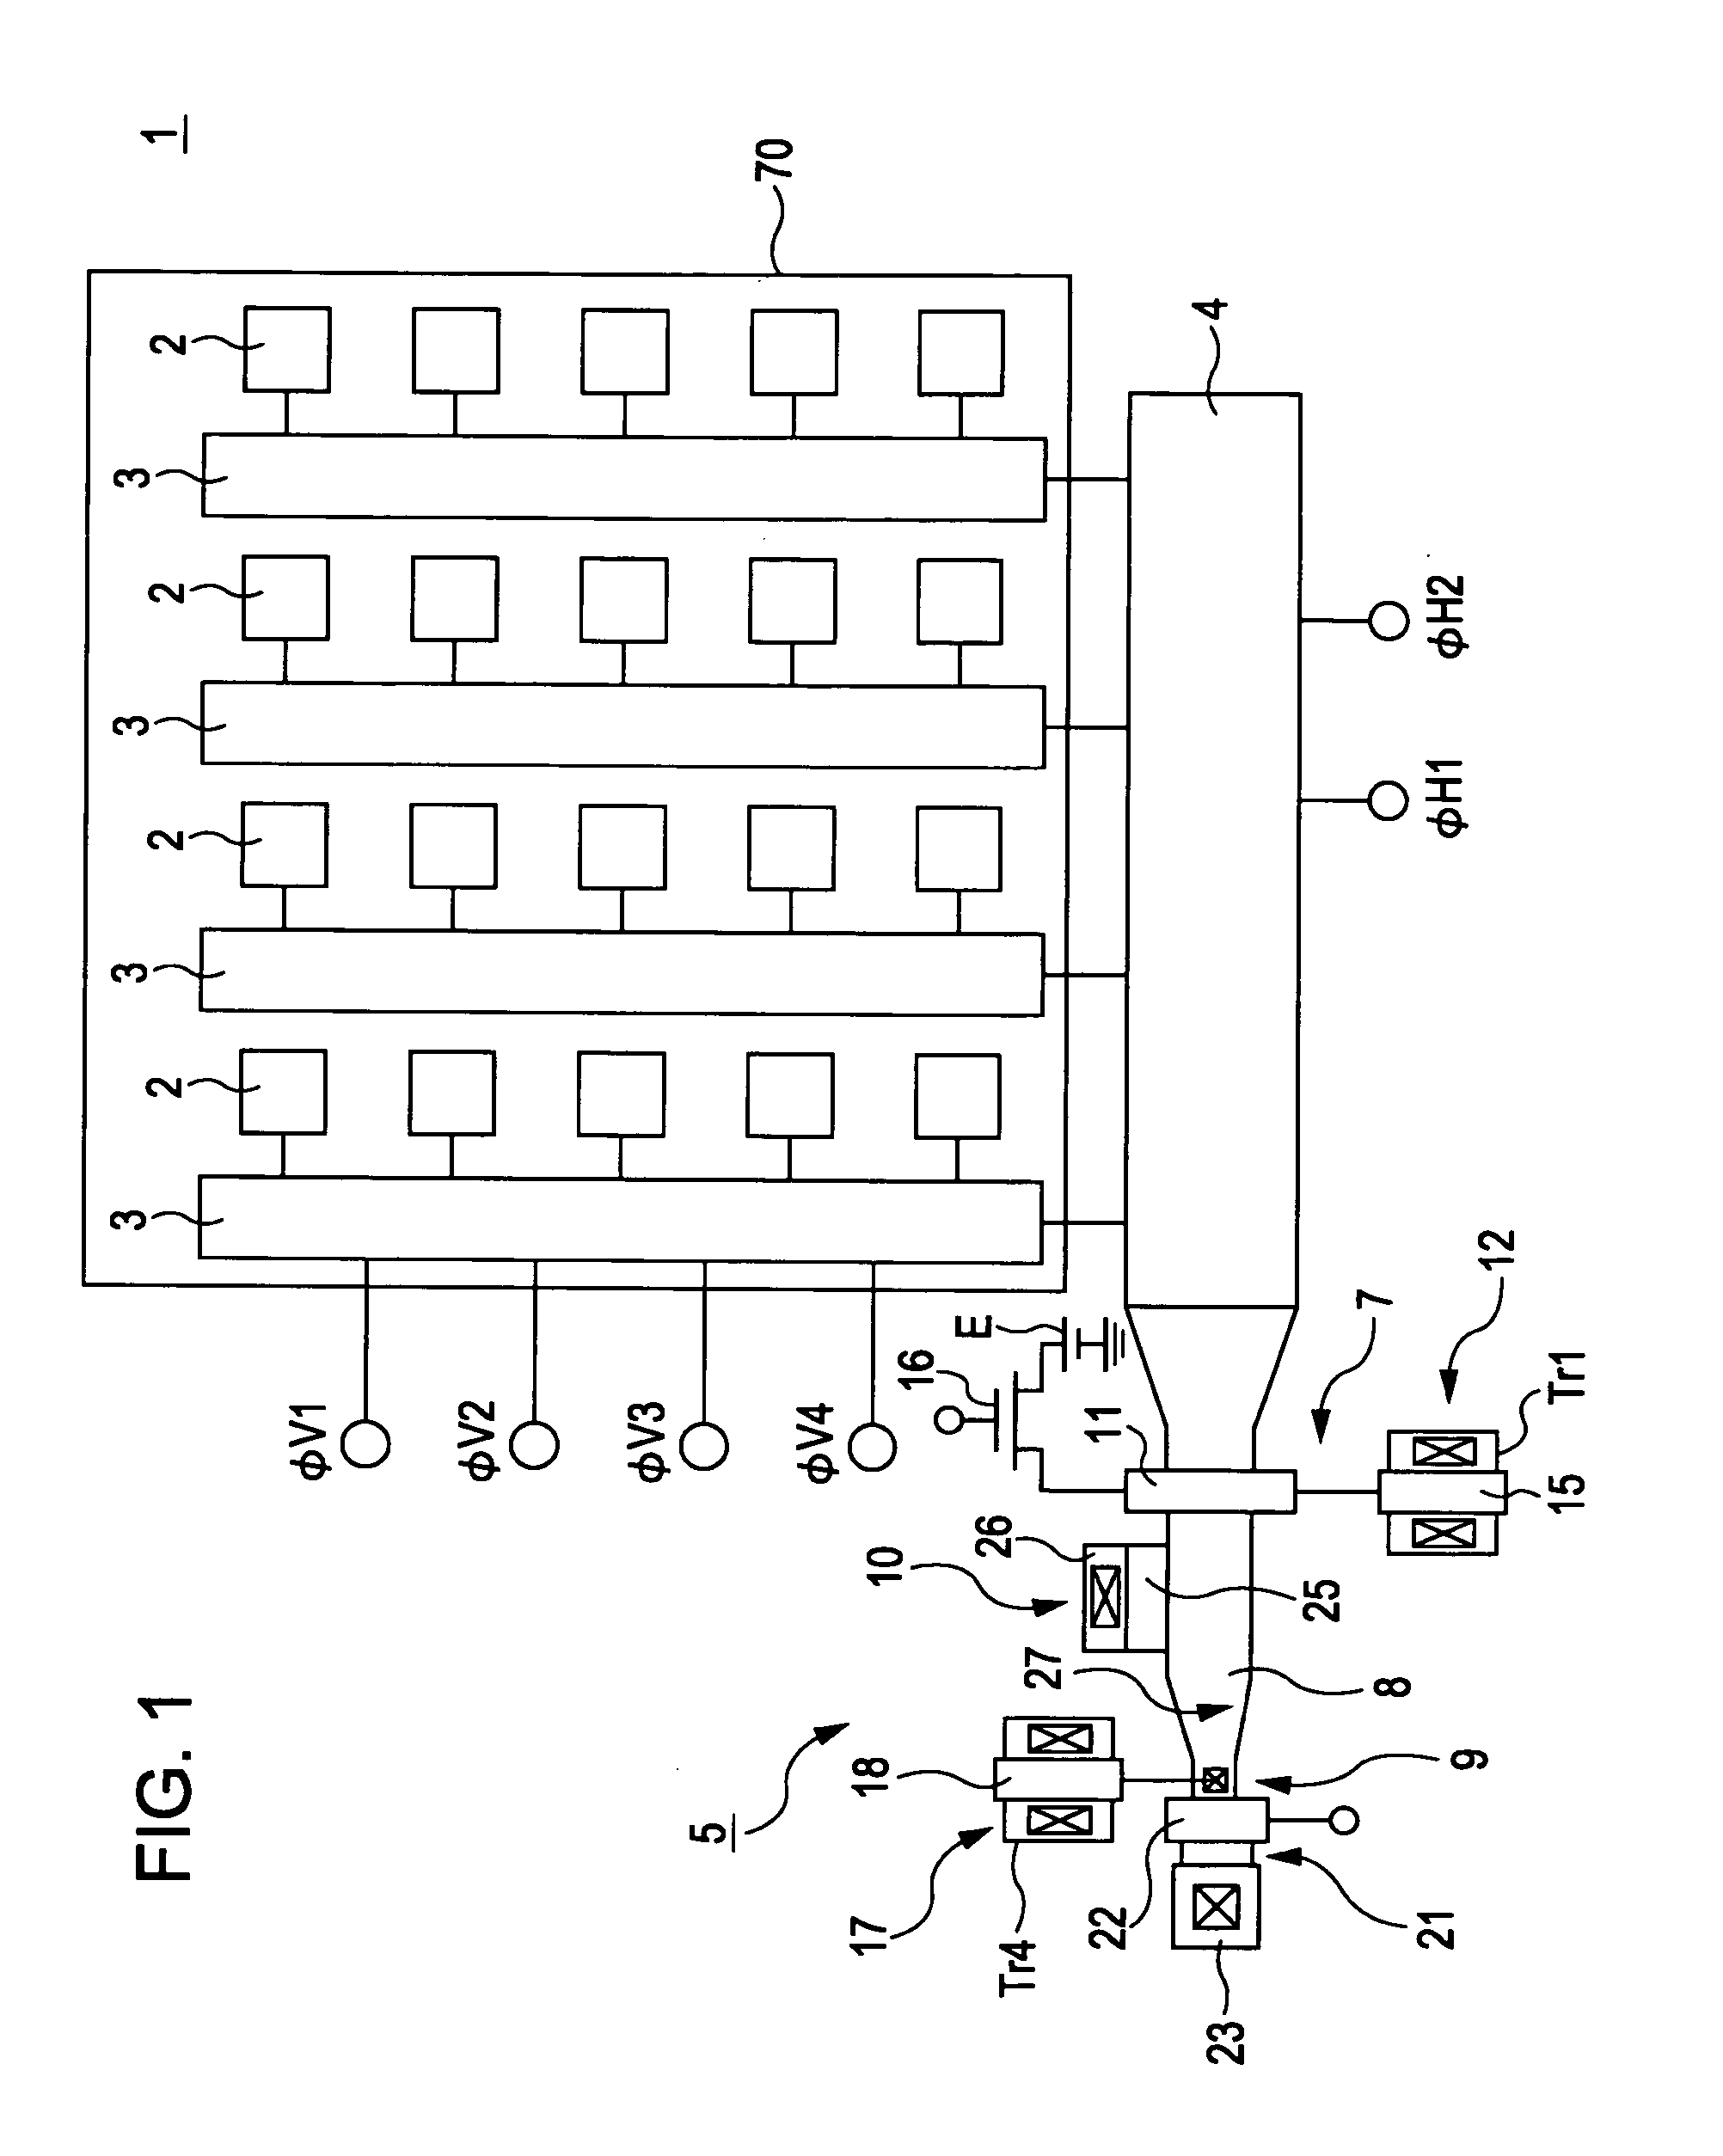 Solid-state image pickup device with an improved output amplifier circuitry